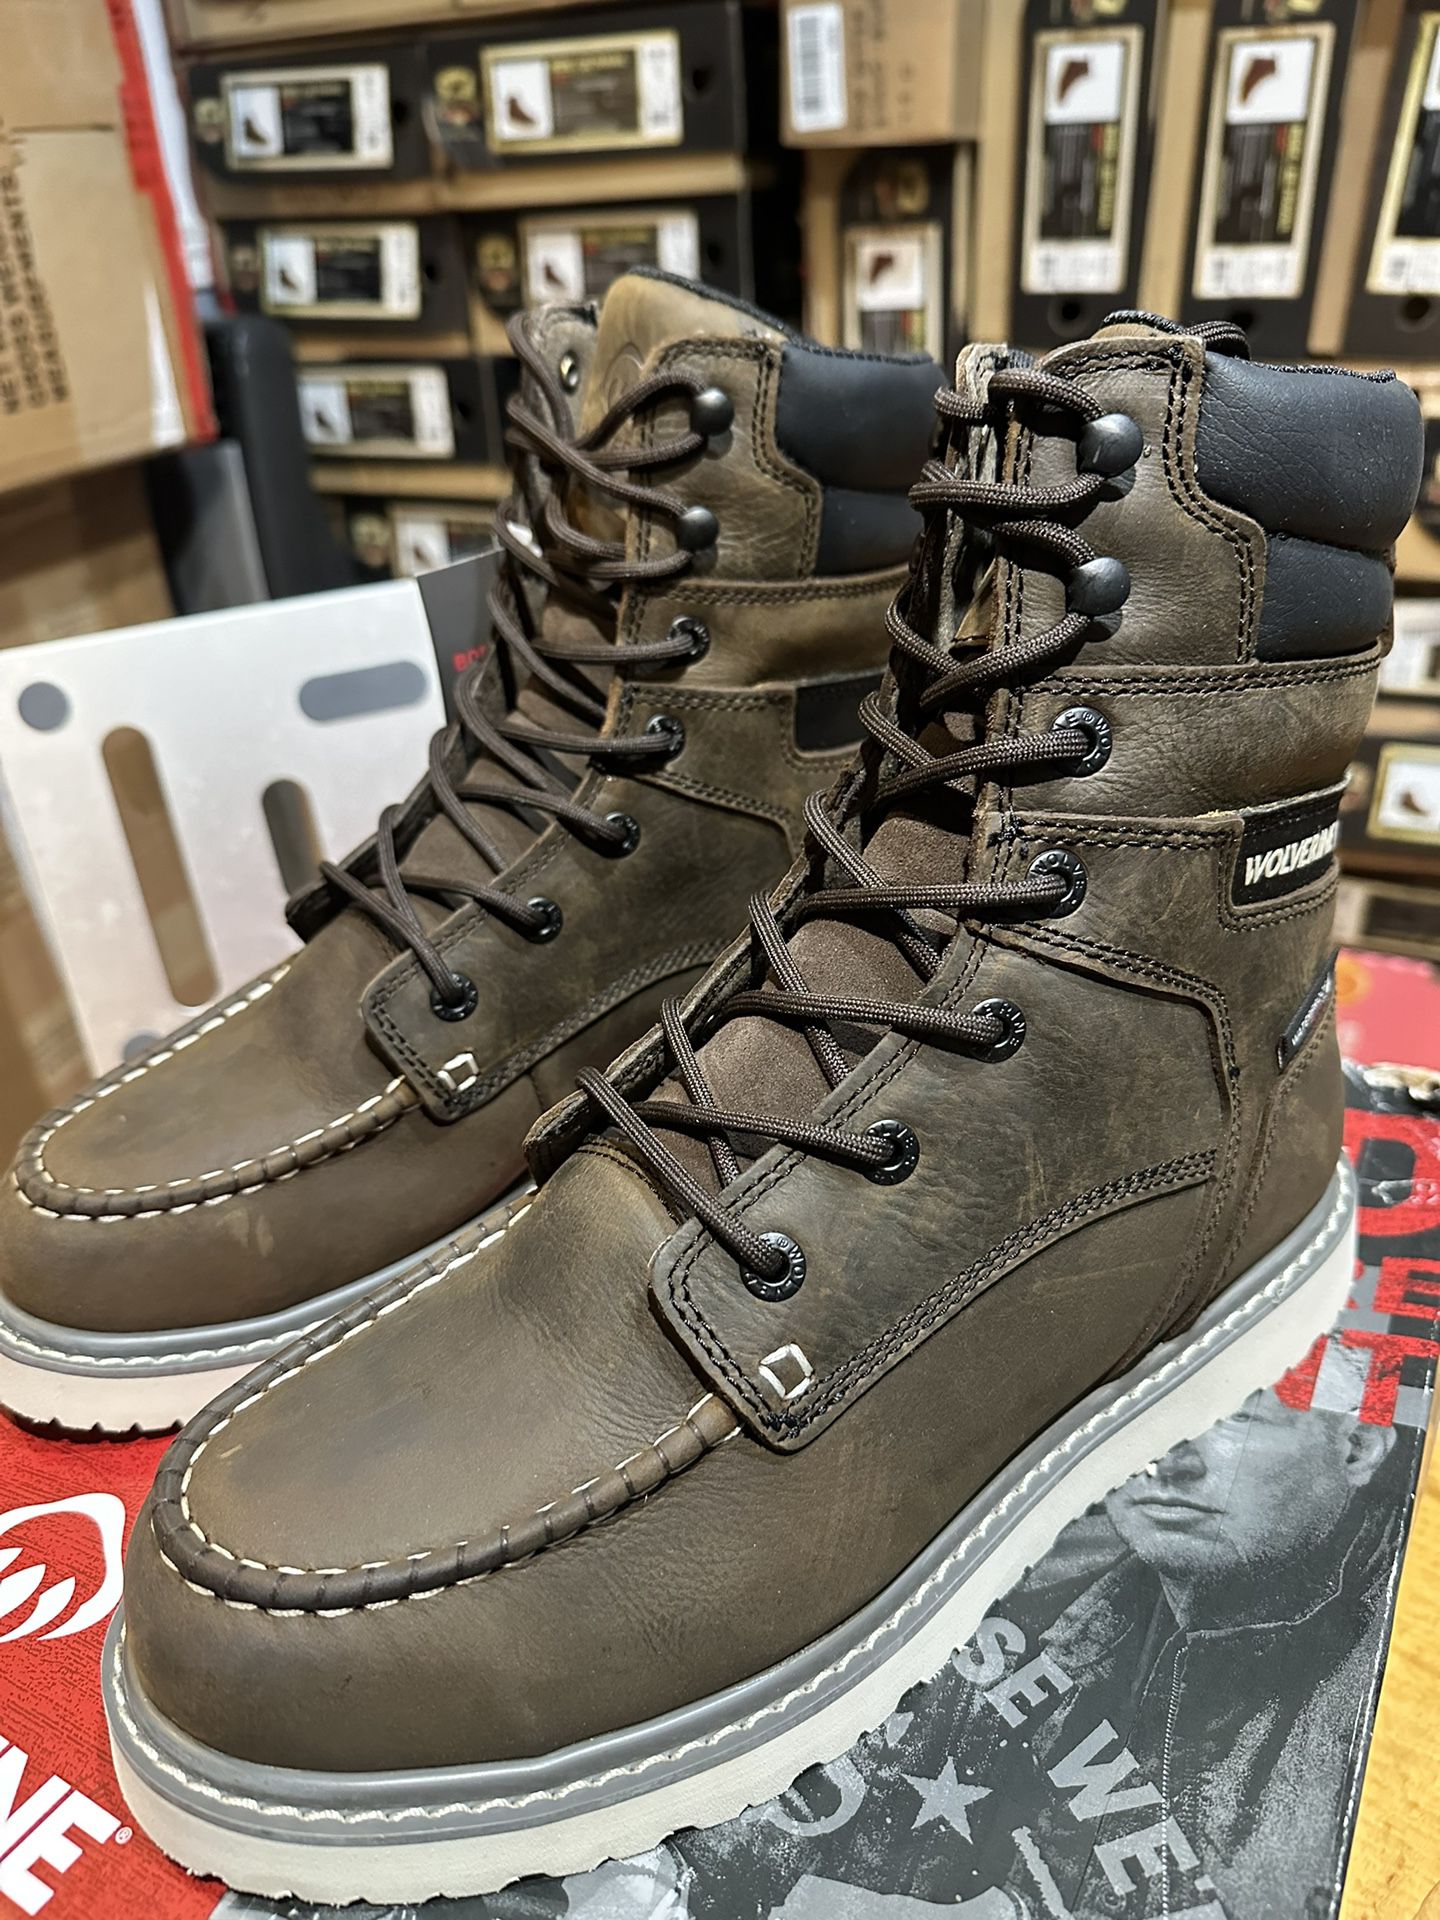 WORK BOOTS 🥾// WOLVERINE //waterproof 💦// Electrical Hazard// Slip resistant And Oil Resistant// Delivery 🚚 Available// 